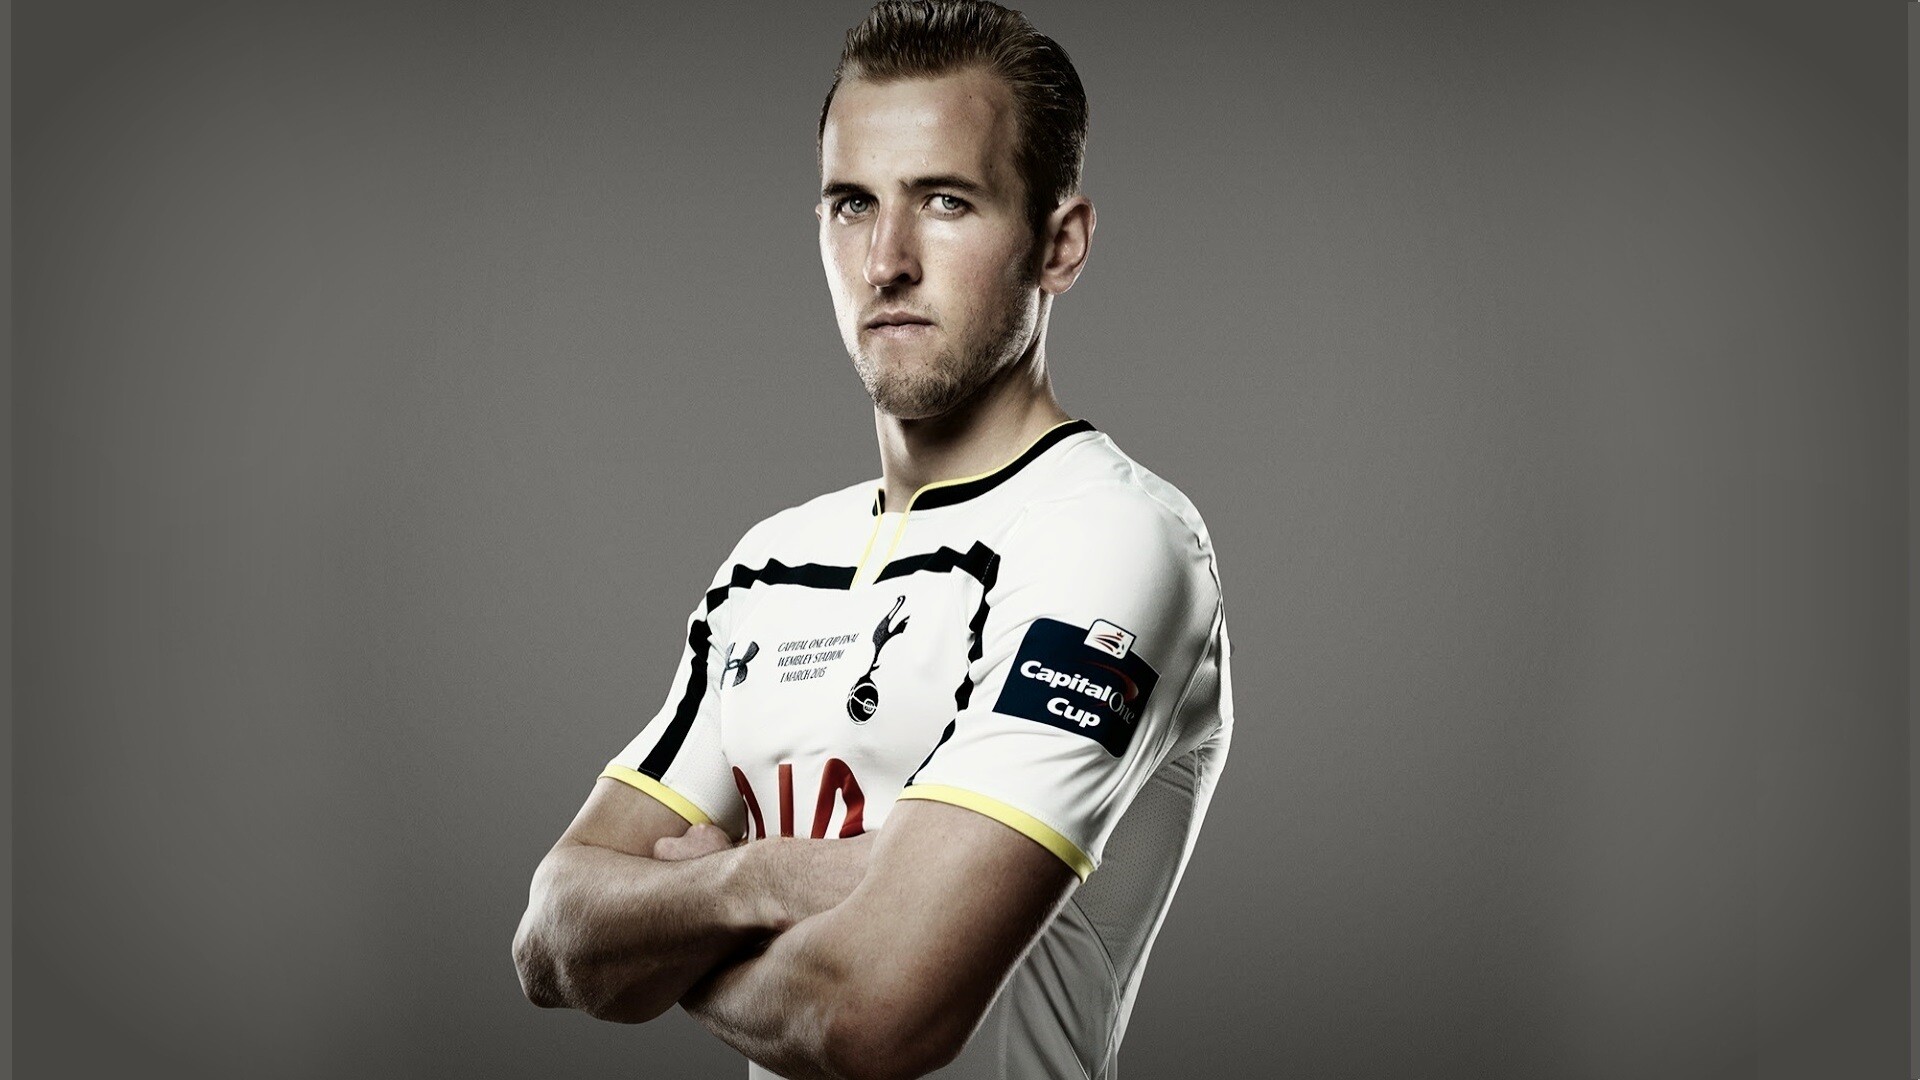 Harry Kane: He signed a five-and-a-half-year contract with the Tottenham Hotspur F.C., on 2 February 2015. 1920x1080 Full HD Background.